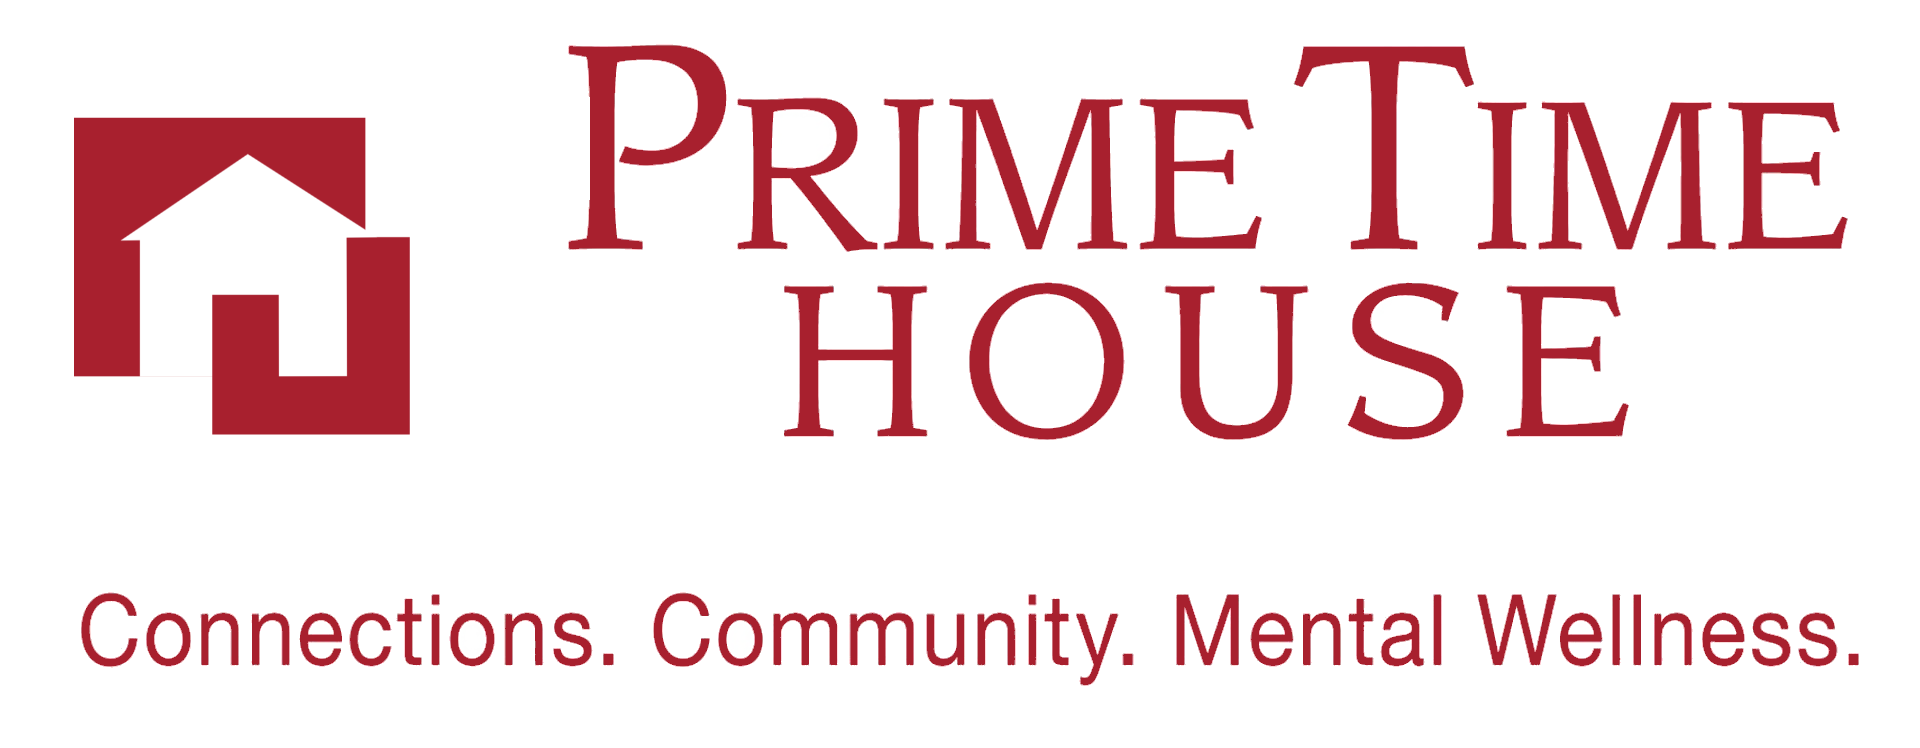 Prime Time House